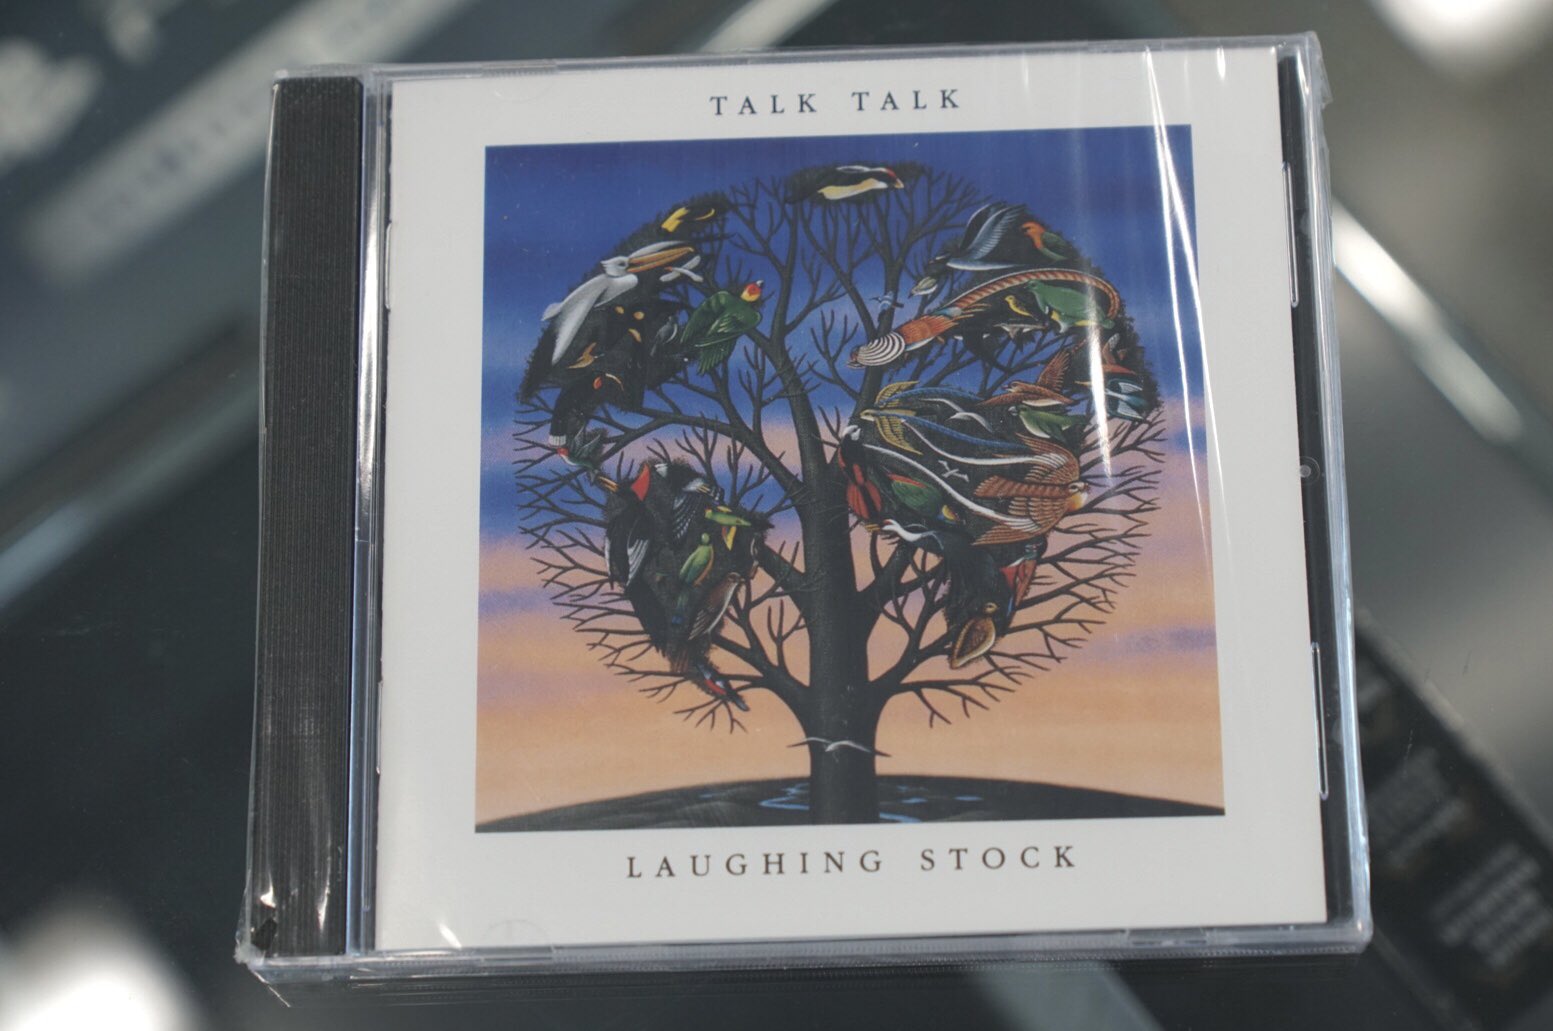 HIDEO_KOJIMA Twitter: "Purchased CD of TALK TALK's last album "LAUGHING STOCK", as I only had the vinyl. https://t.co/xaq8Mj1WV7" /